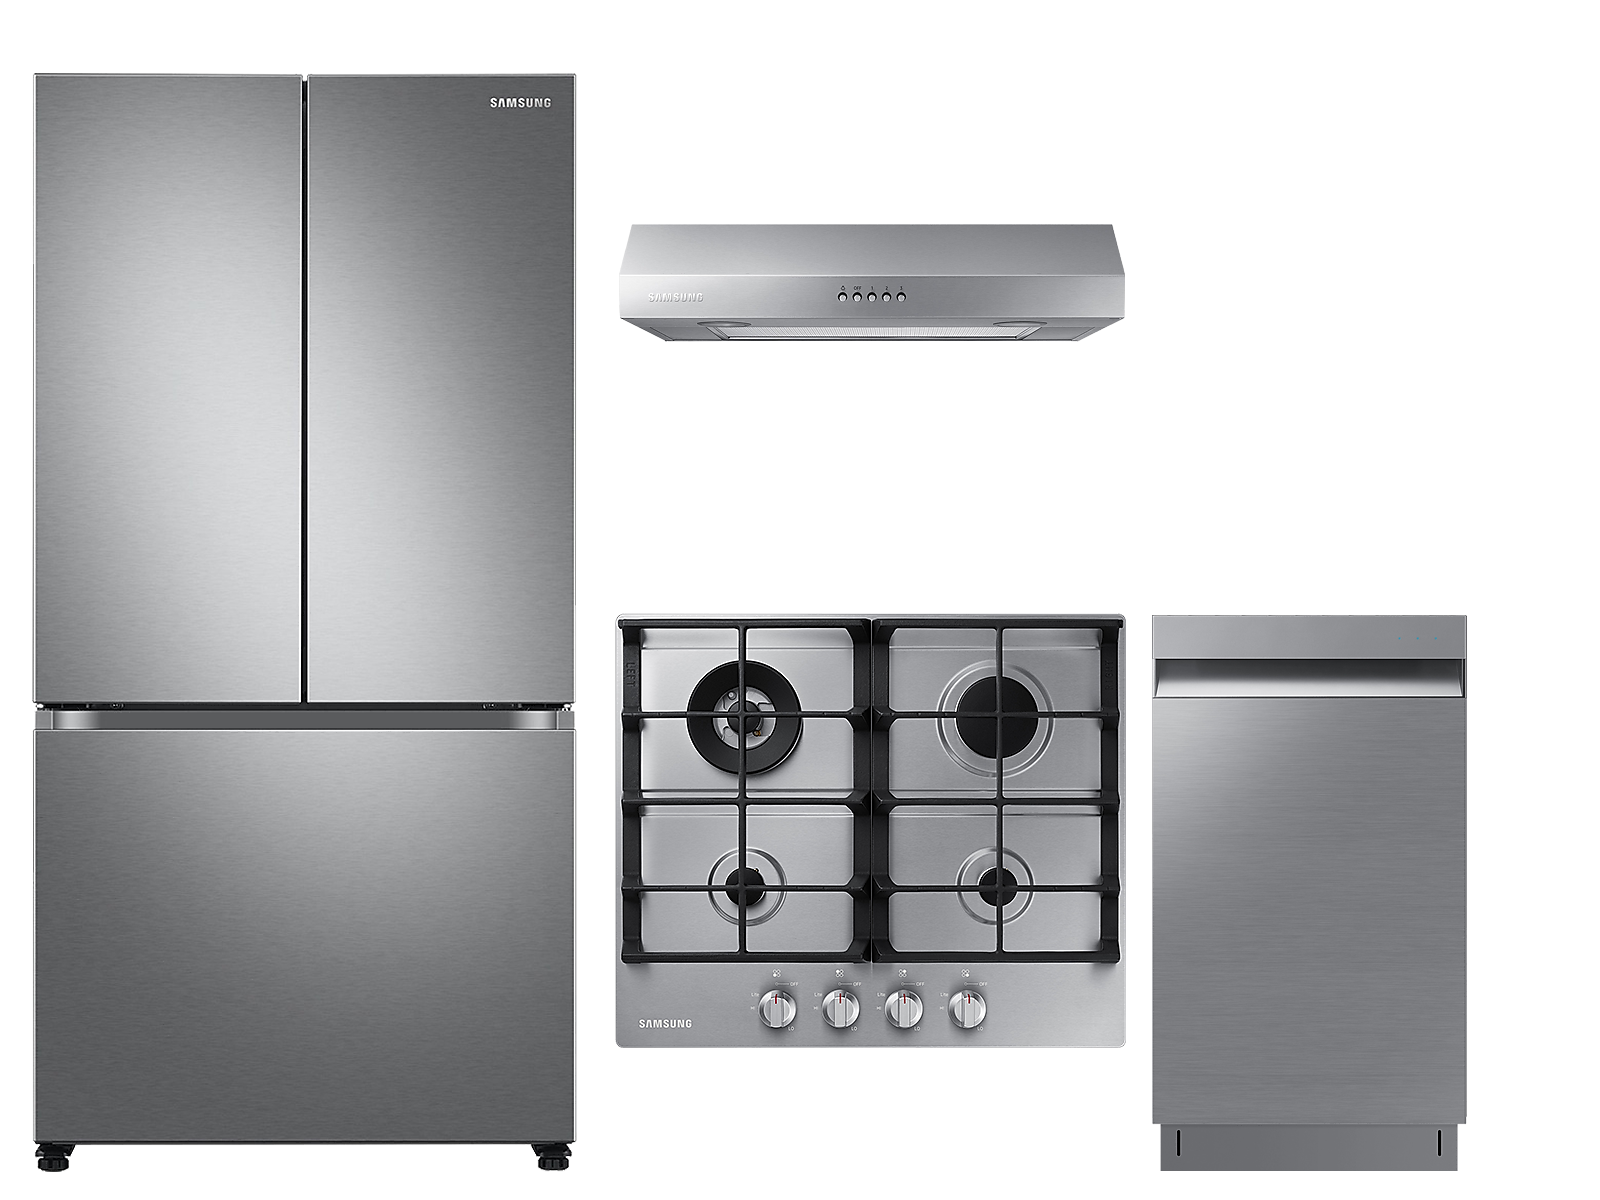 Samsung 3-Door French Door Refrigerator, gas cooktop, range hood and dishwaster small kitchen package in Stainless Steel(BNDL-1646291346728)